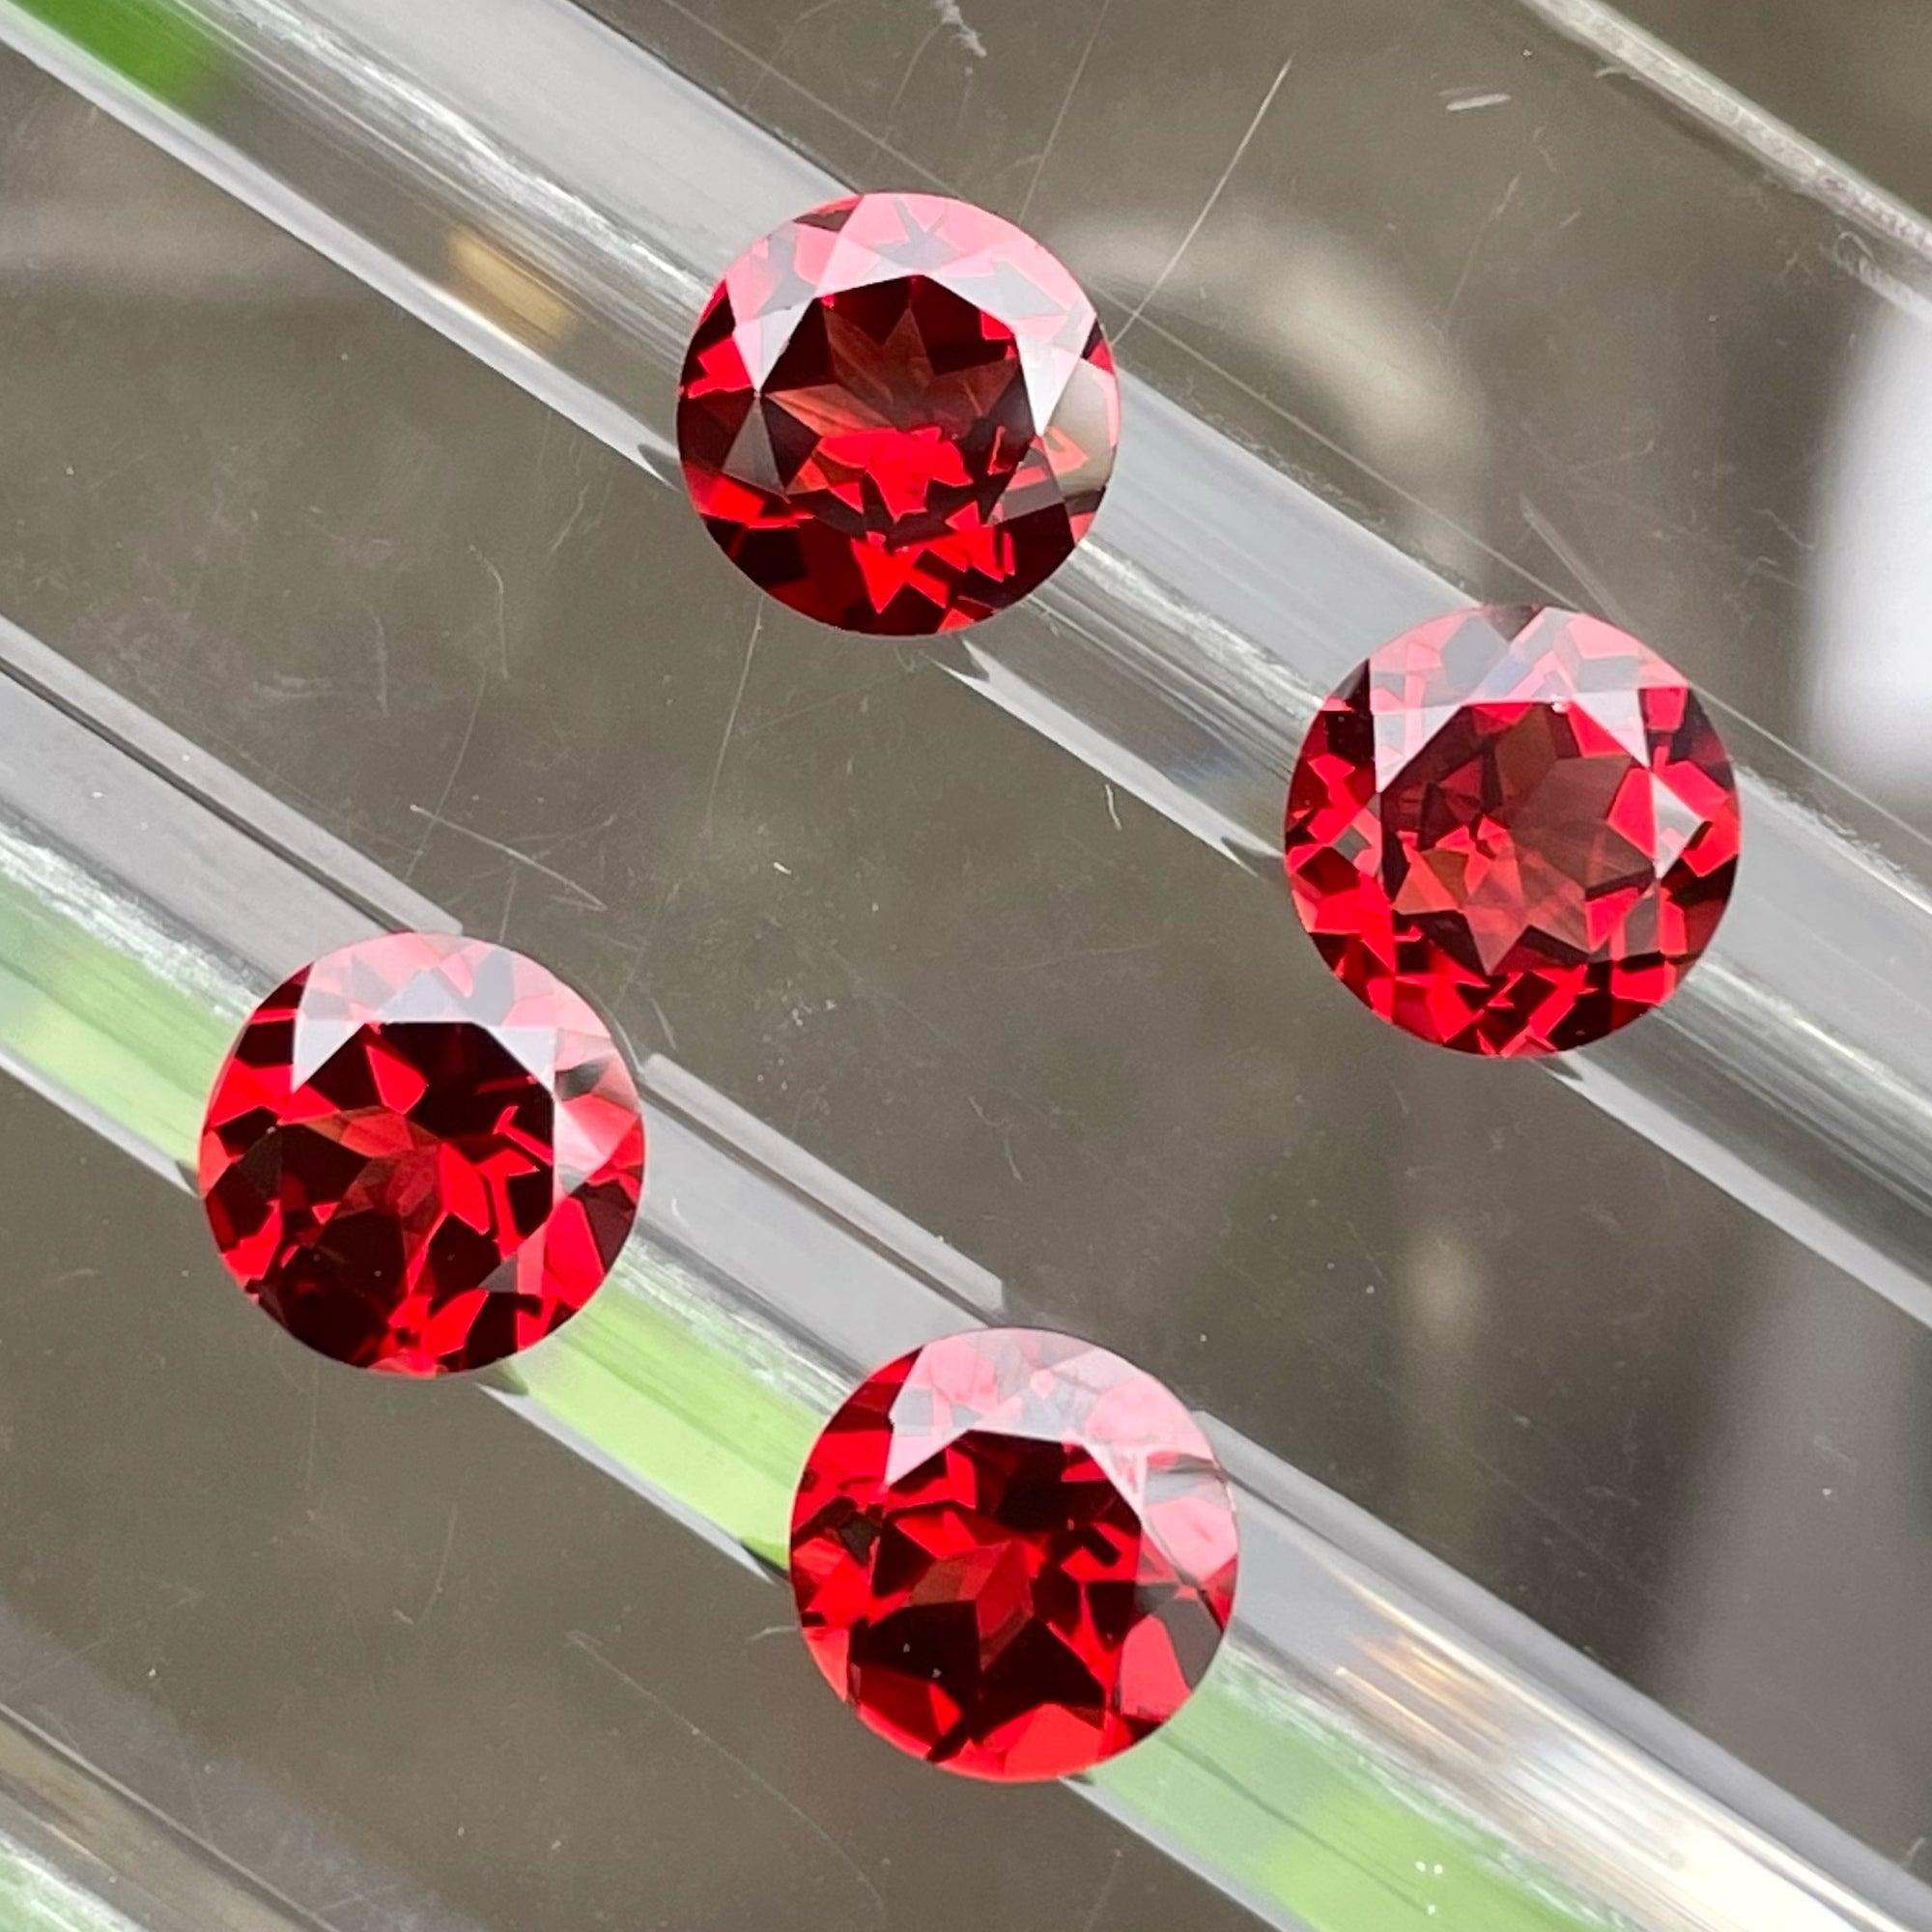 Natural Bright Red Rhodolite Garnet Set, Available For Sale at Wholesale Price Natural High Quality 8.90 Carats Untreated  Garnet Gemstone From Malawi.

 

Product Information:
GEMSTONE NAME: Natural Bright Red Rhodolite Garnet Set
WEIGHT: 8.90